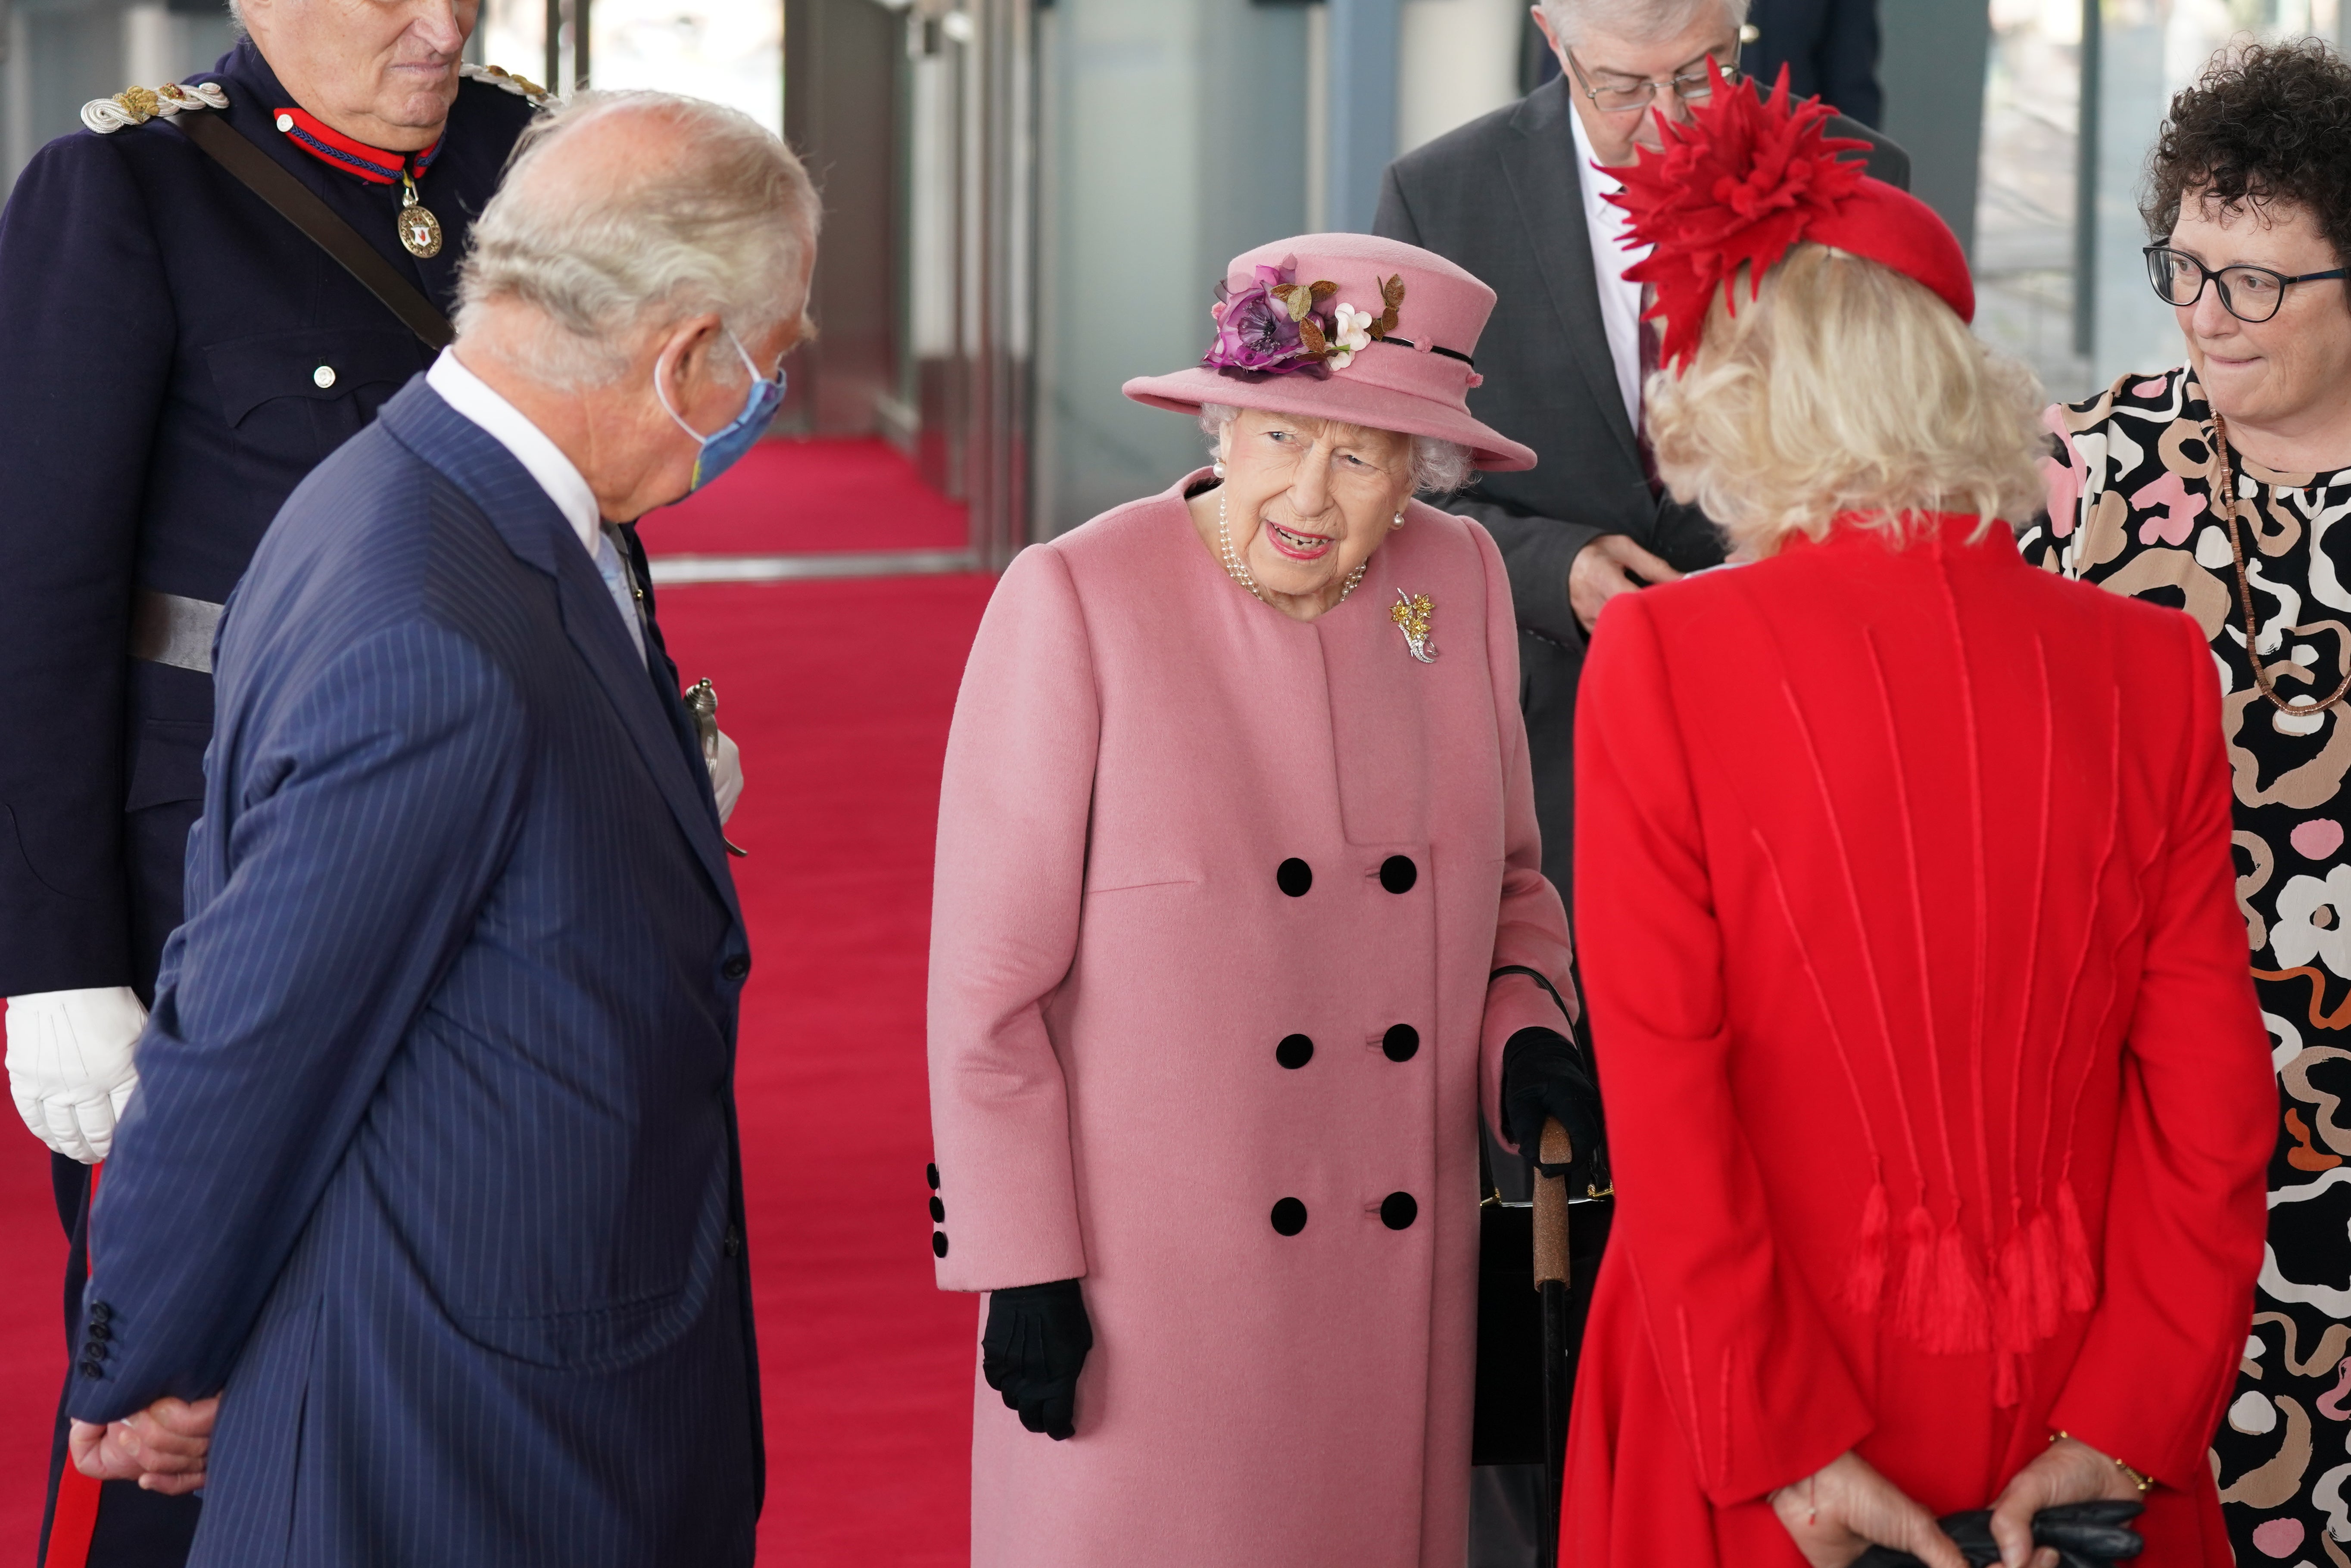 The Queen’s comments about action on climate change came when she attended the opening of the Welsh Senedd with Charles and Camilla. Jacob King/PA